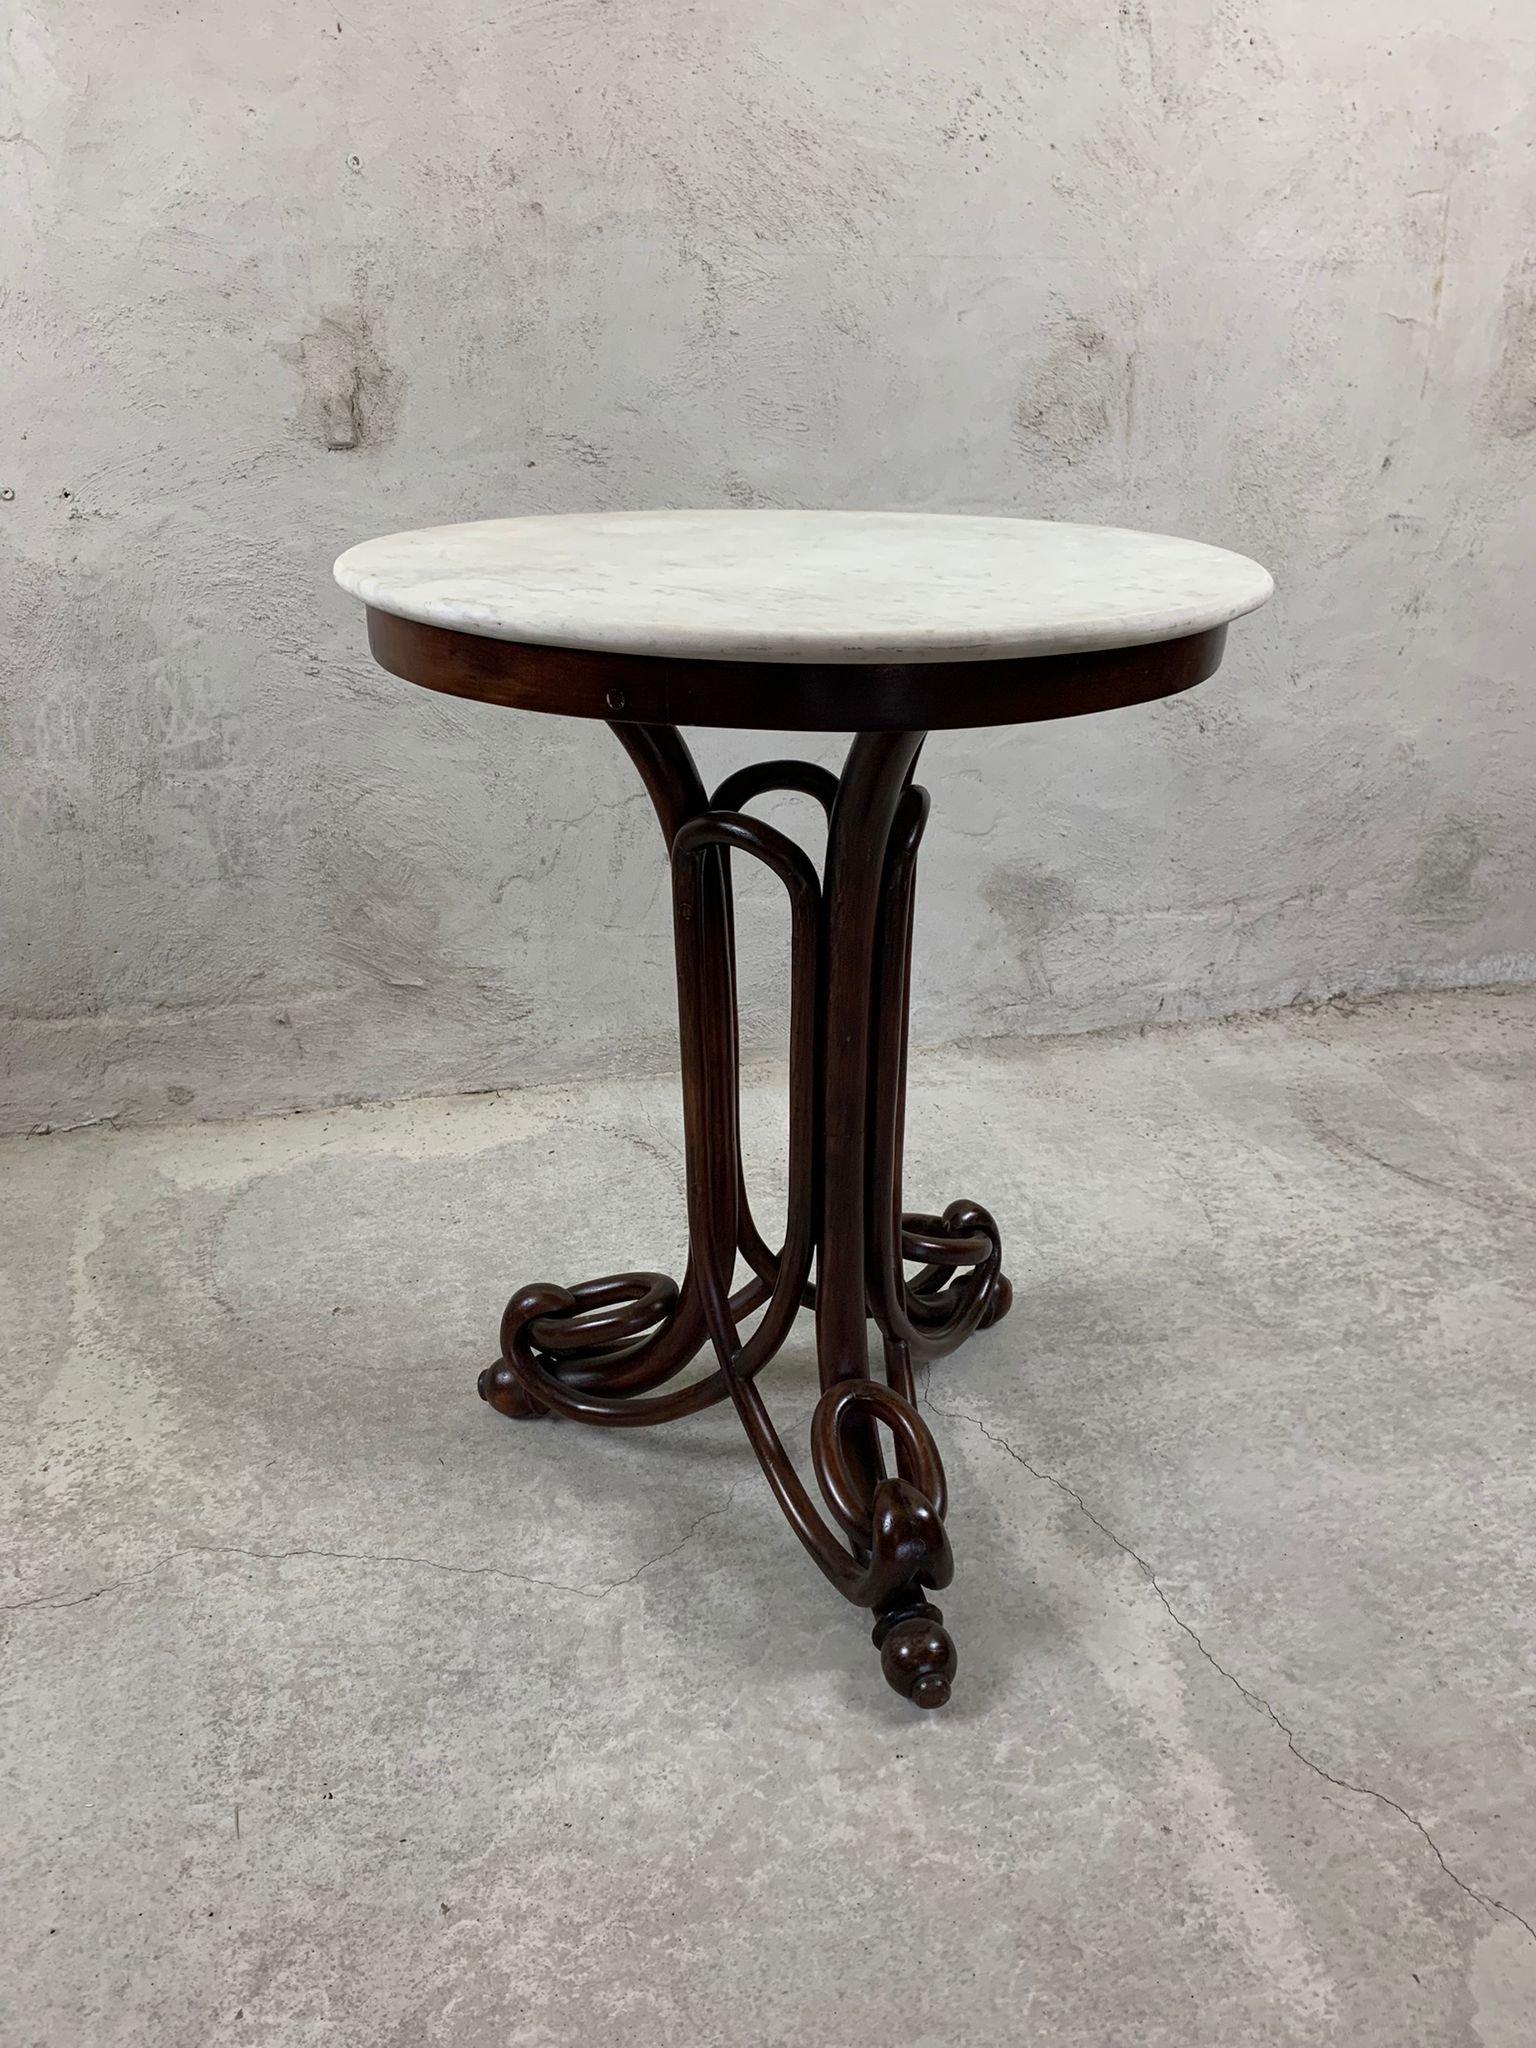 Wonderful bent beechwood and white marble side table in tha manner of J&J Kohn’s N.1 flower table. 1980’s. 

Overall good condition with wear consistent to age and use. 

